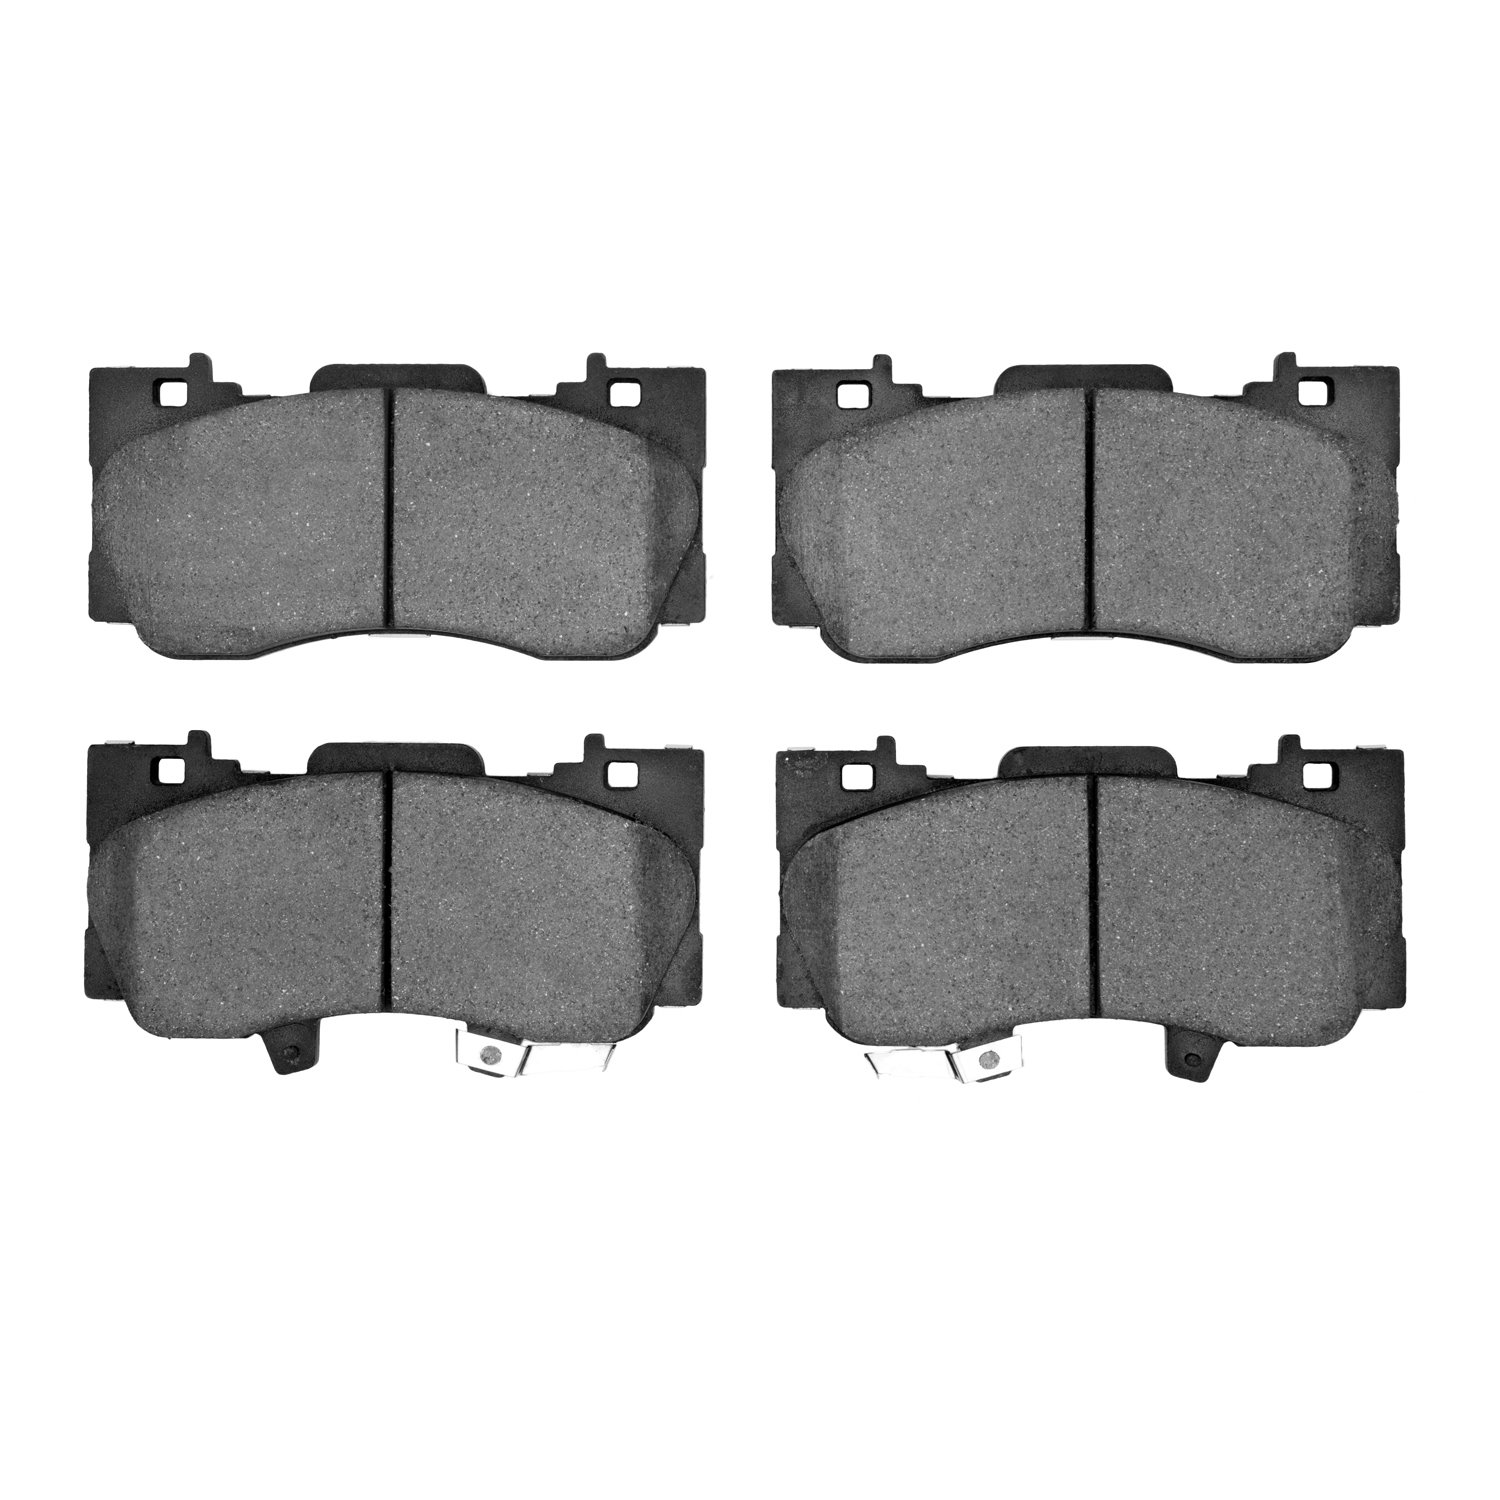 1000-1784-00 Track/Street Low-Metallic Brake Pads Kit, Fits Select Ford/Lincoln/Mercury/Mazda, Position: Front